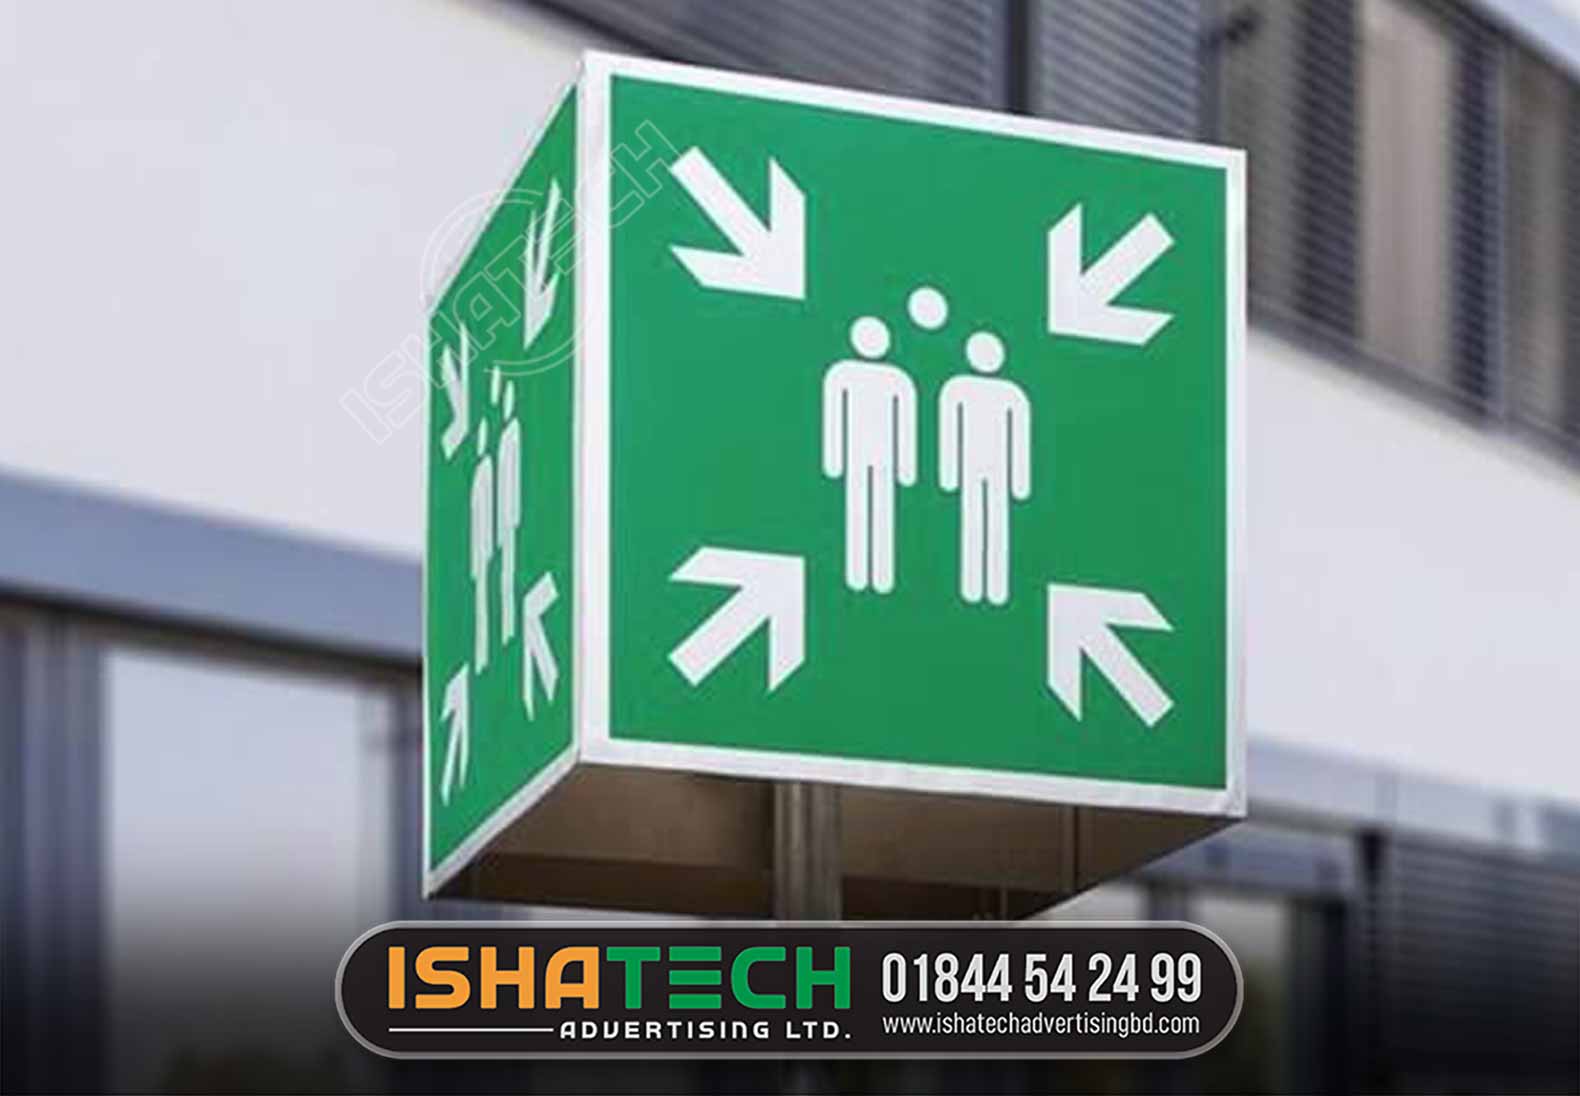 Emergency Exit Crowd Stock Photos, Images & Pictures